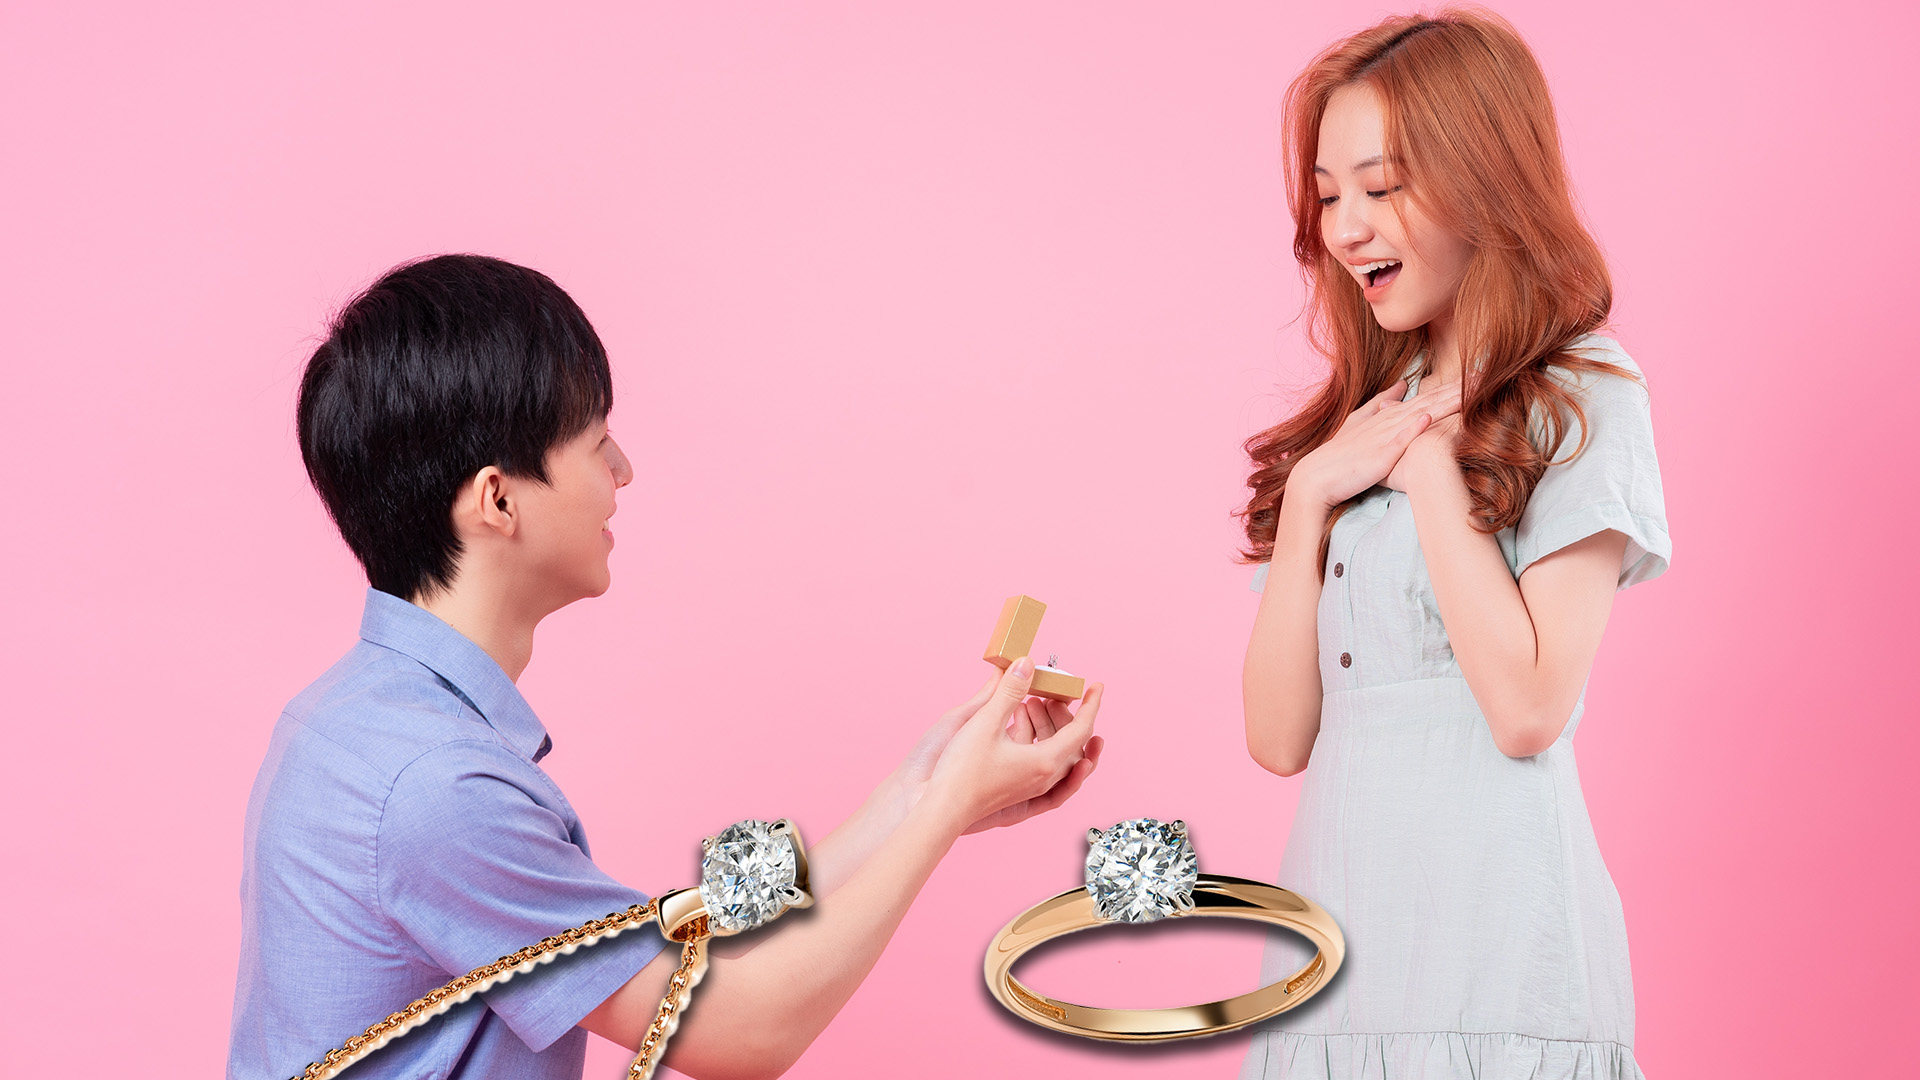 A romantic and caring man in China has captured hearts on mainland social media by making his job-hunting, down-in-the-dumps girlfriend a fictional offer of employment she could not refuse. Photo: SCMP composite/Shutterstock